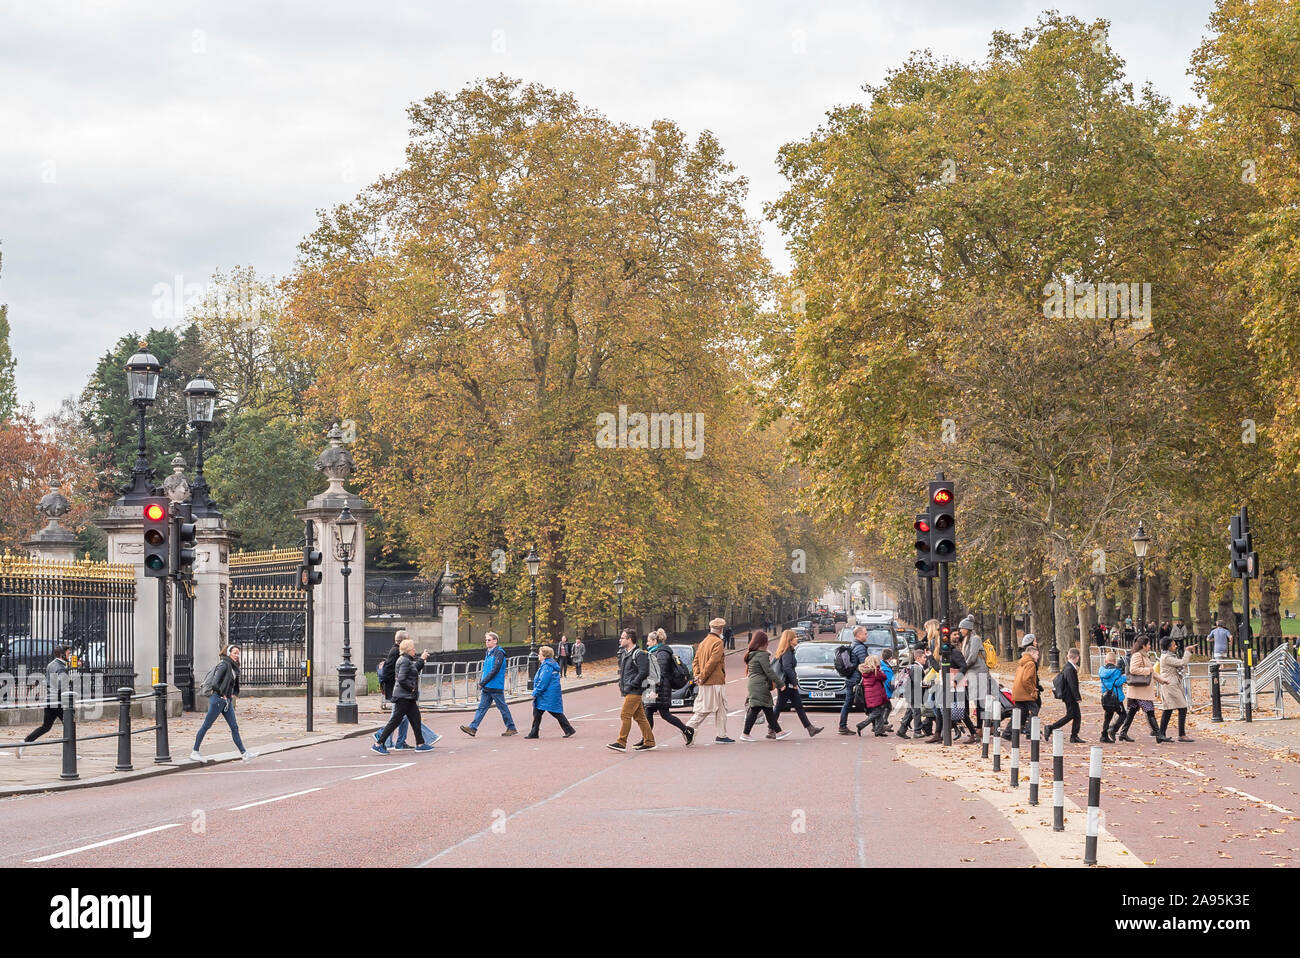 Pedestrians crossing Constitution Hill road, outside Buckingham Palace in central London, as traffic stops at red traffic light signal. Stock Photo